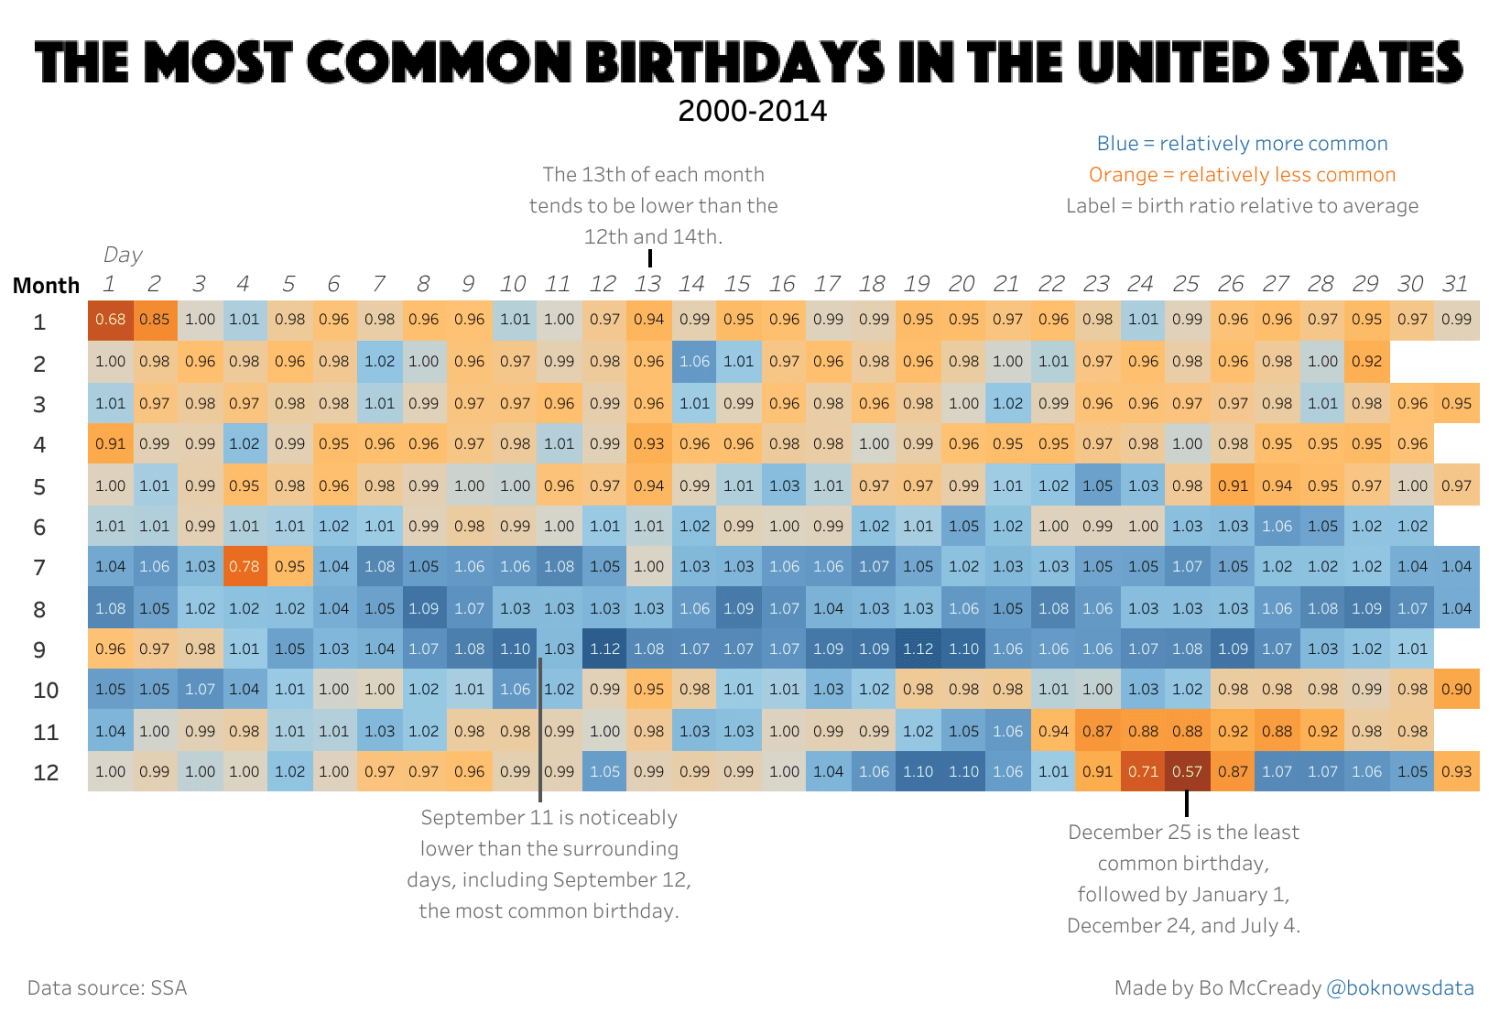 It's my birthday! What are the most common birthdays in the United States?